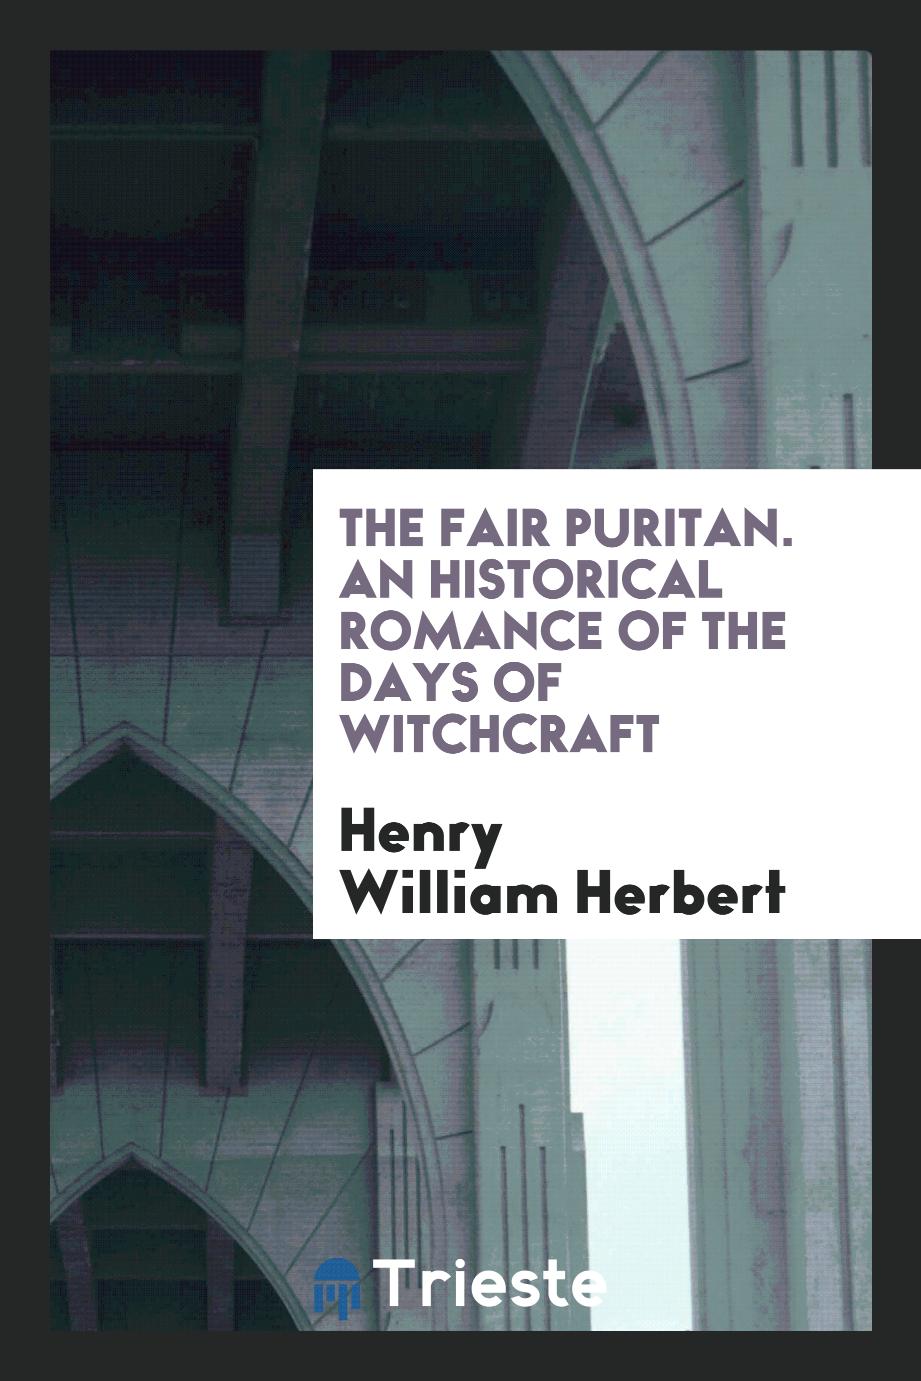 The fair puritan. An historical romance of the days of witchcraft